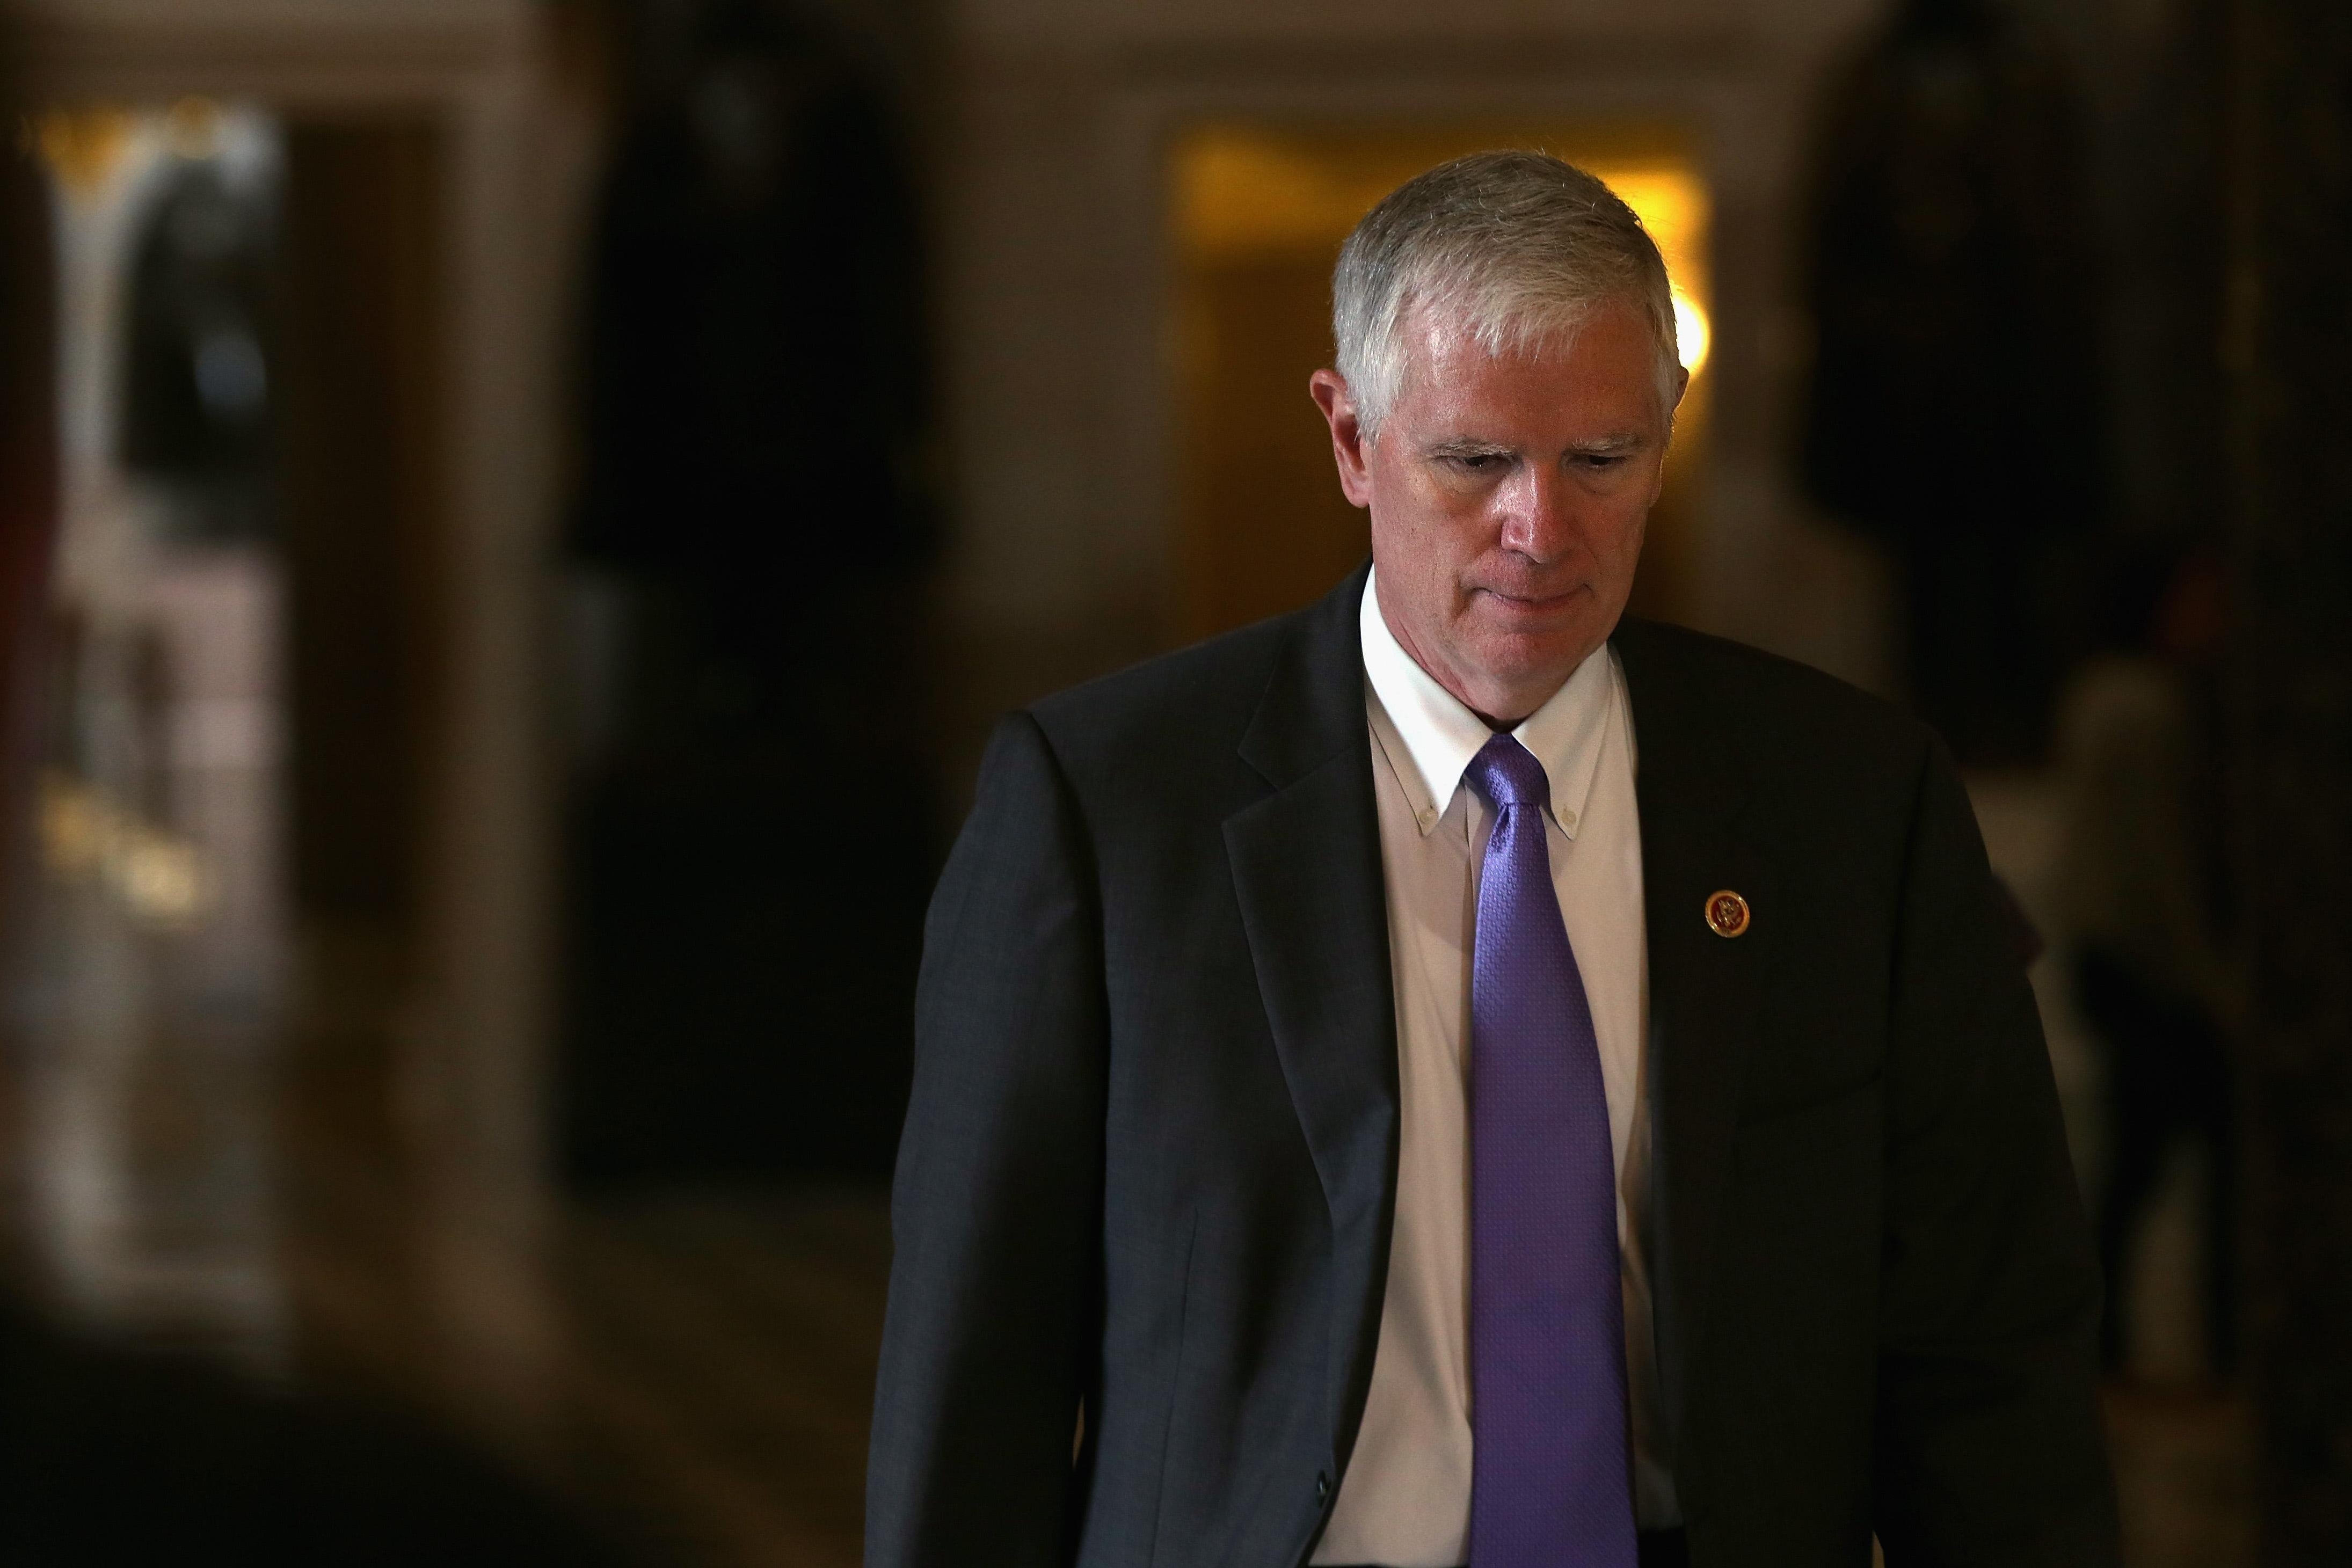 Mo Brooks casts his eyes downward as he walks in the Capitol.